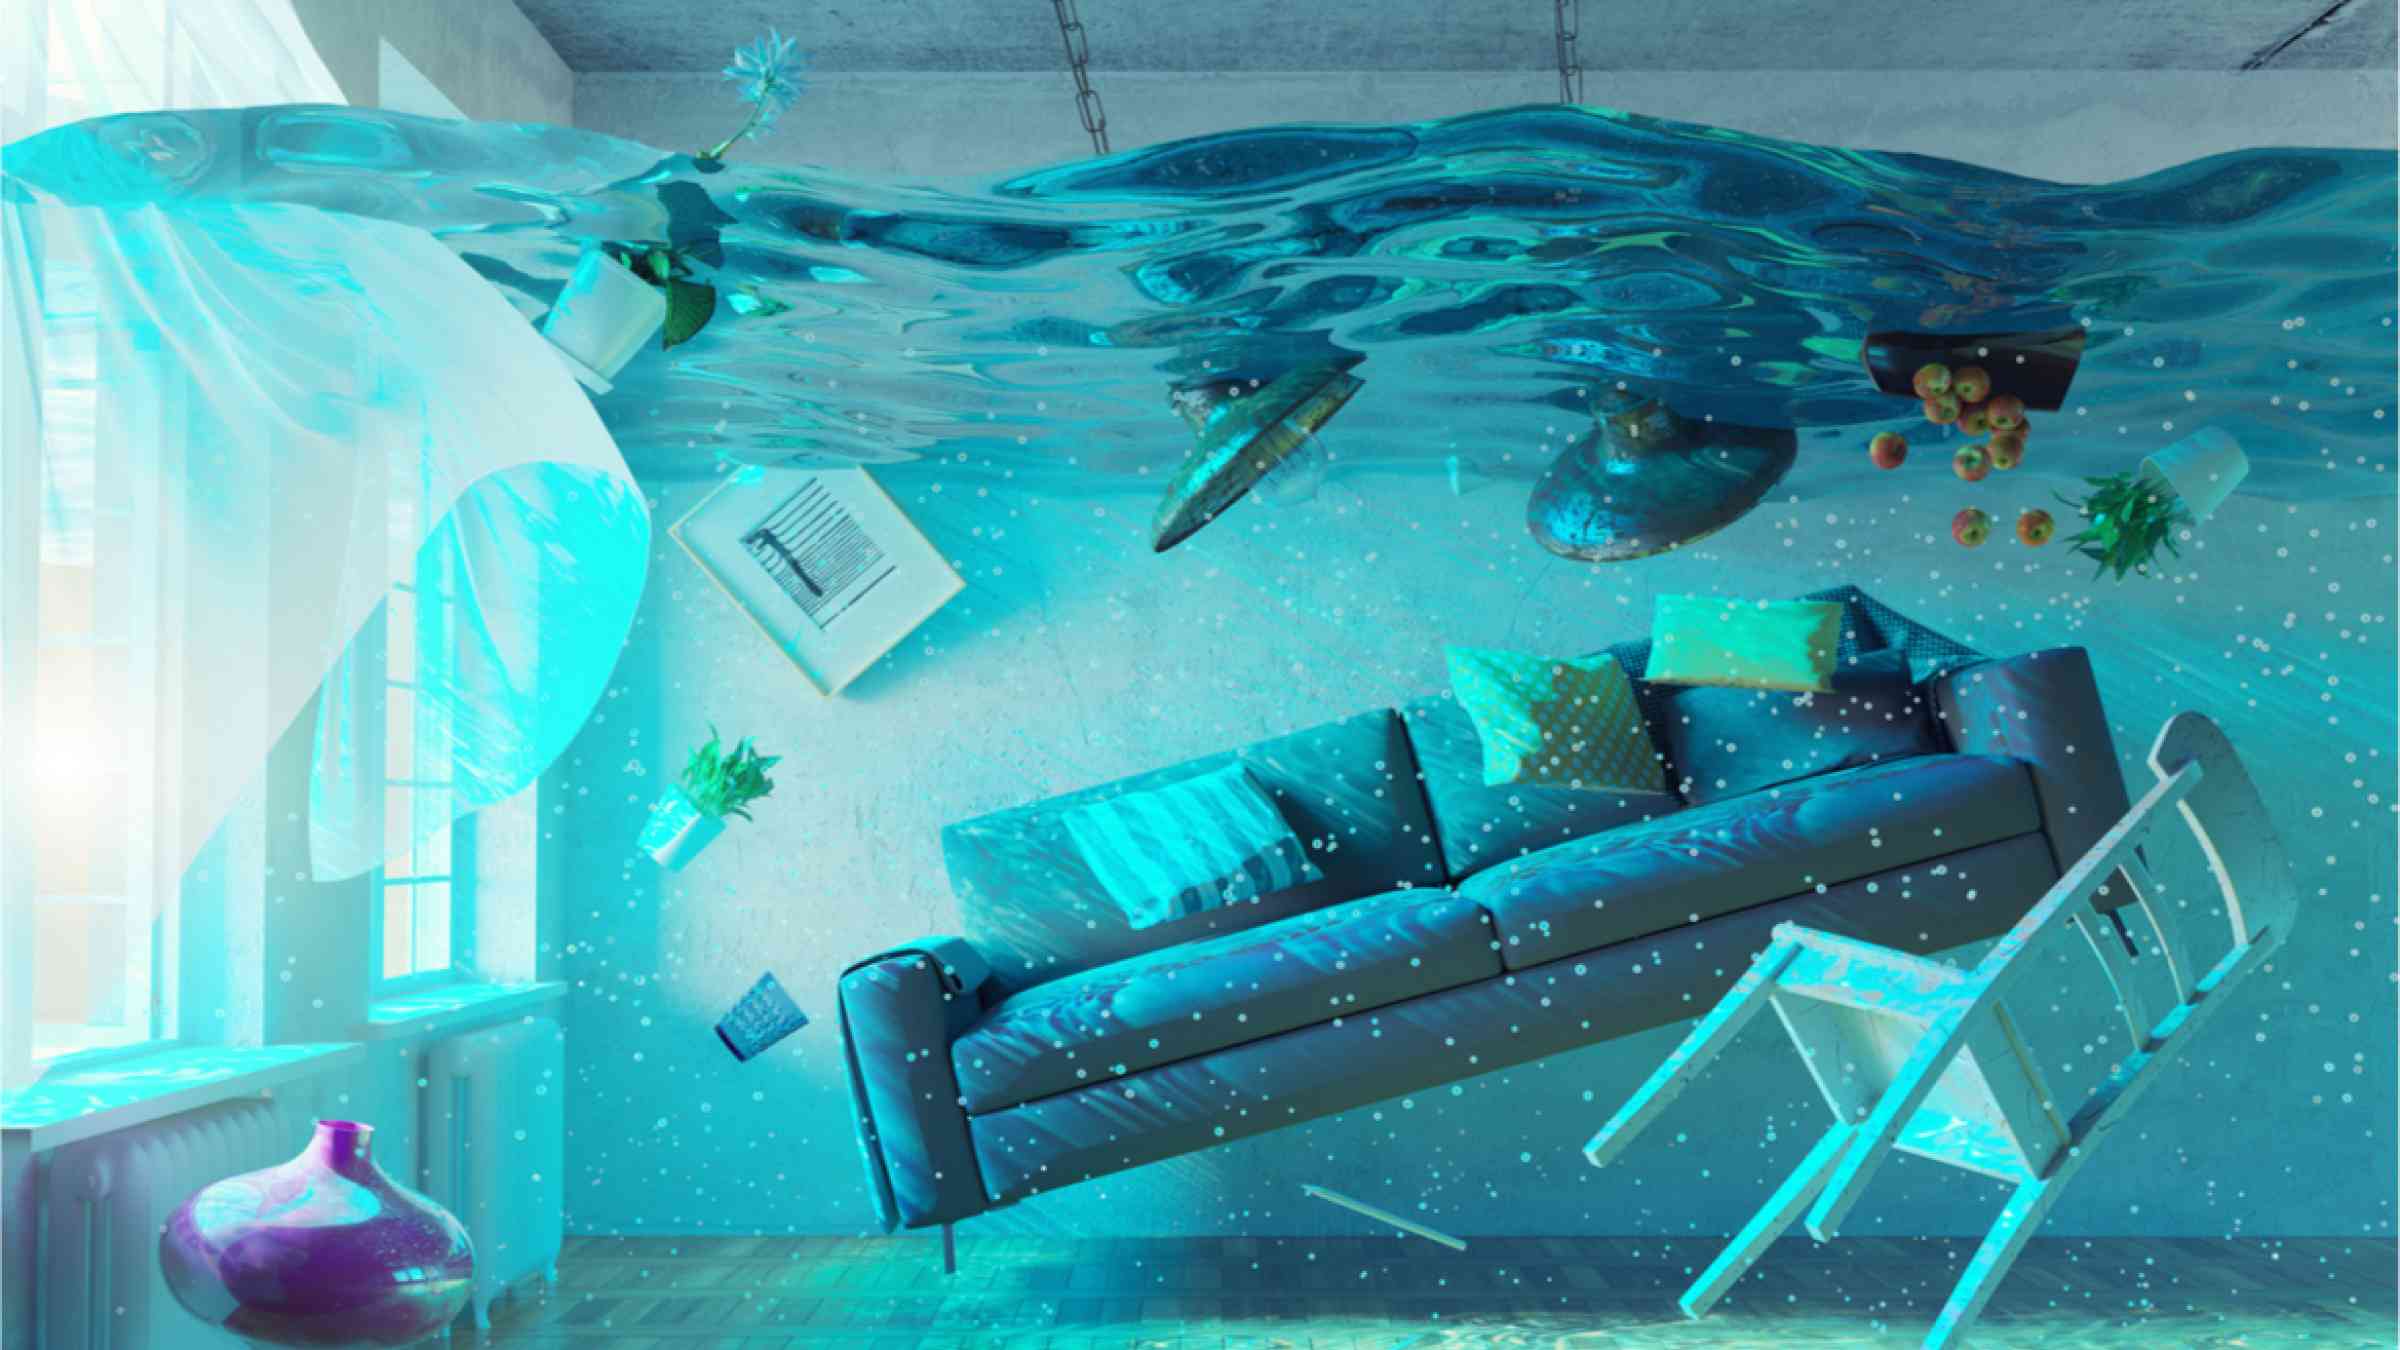 This image shows a living room under water with furniture floating around.